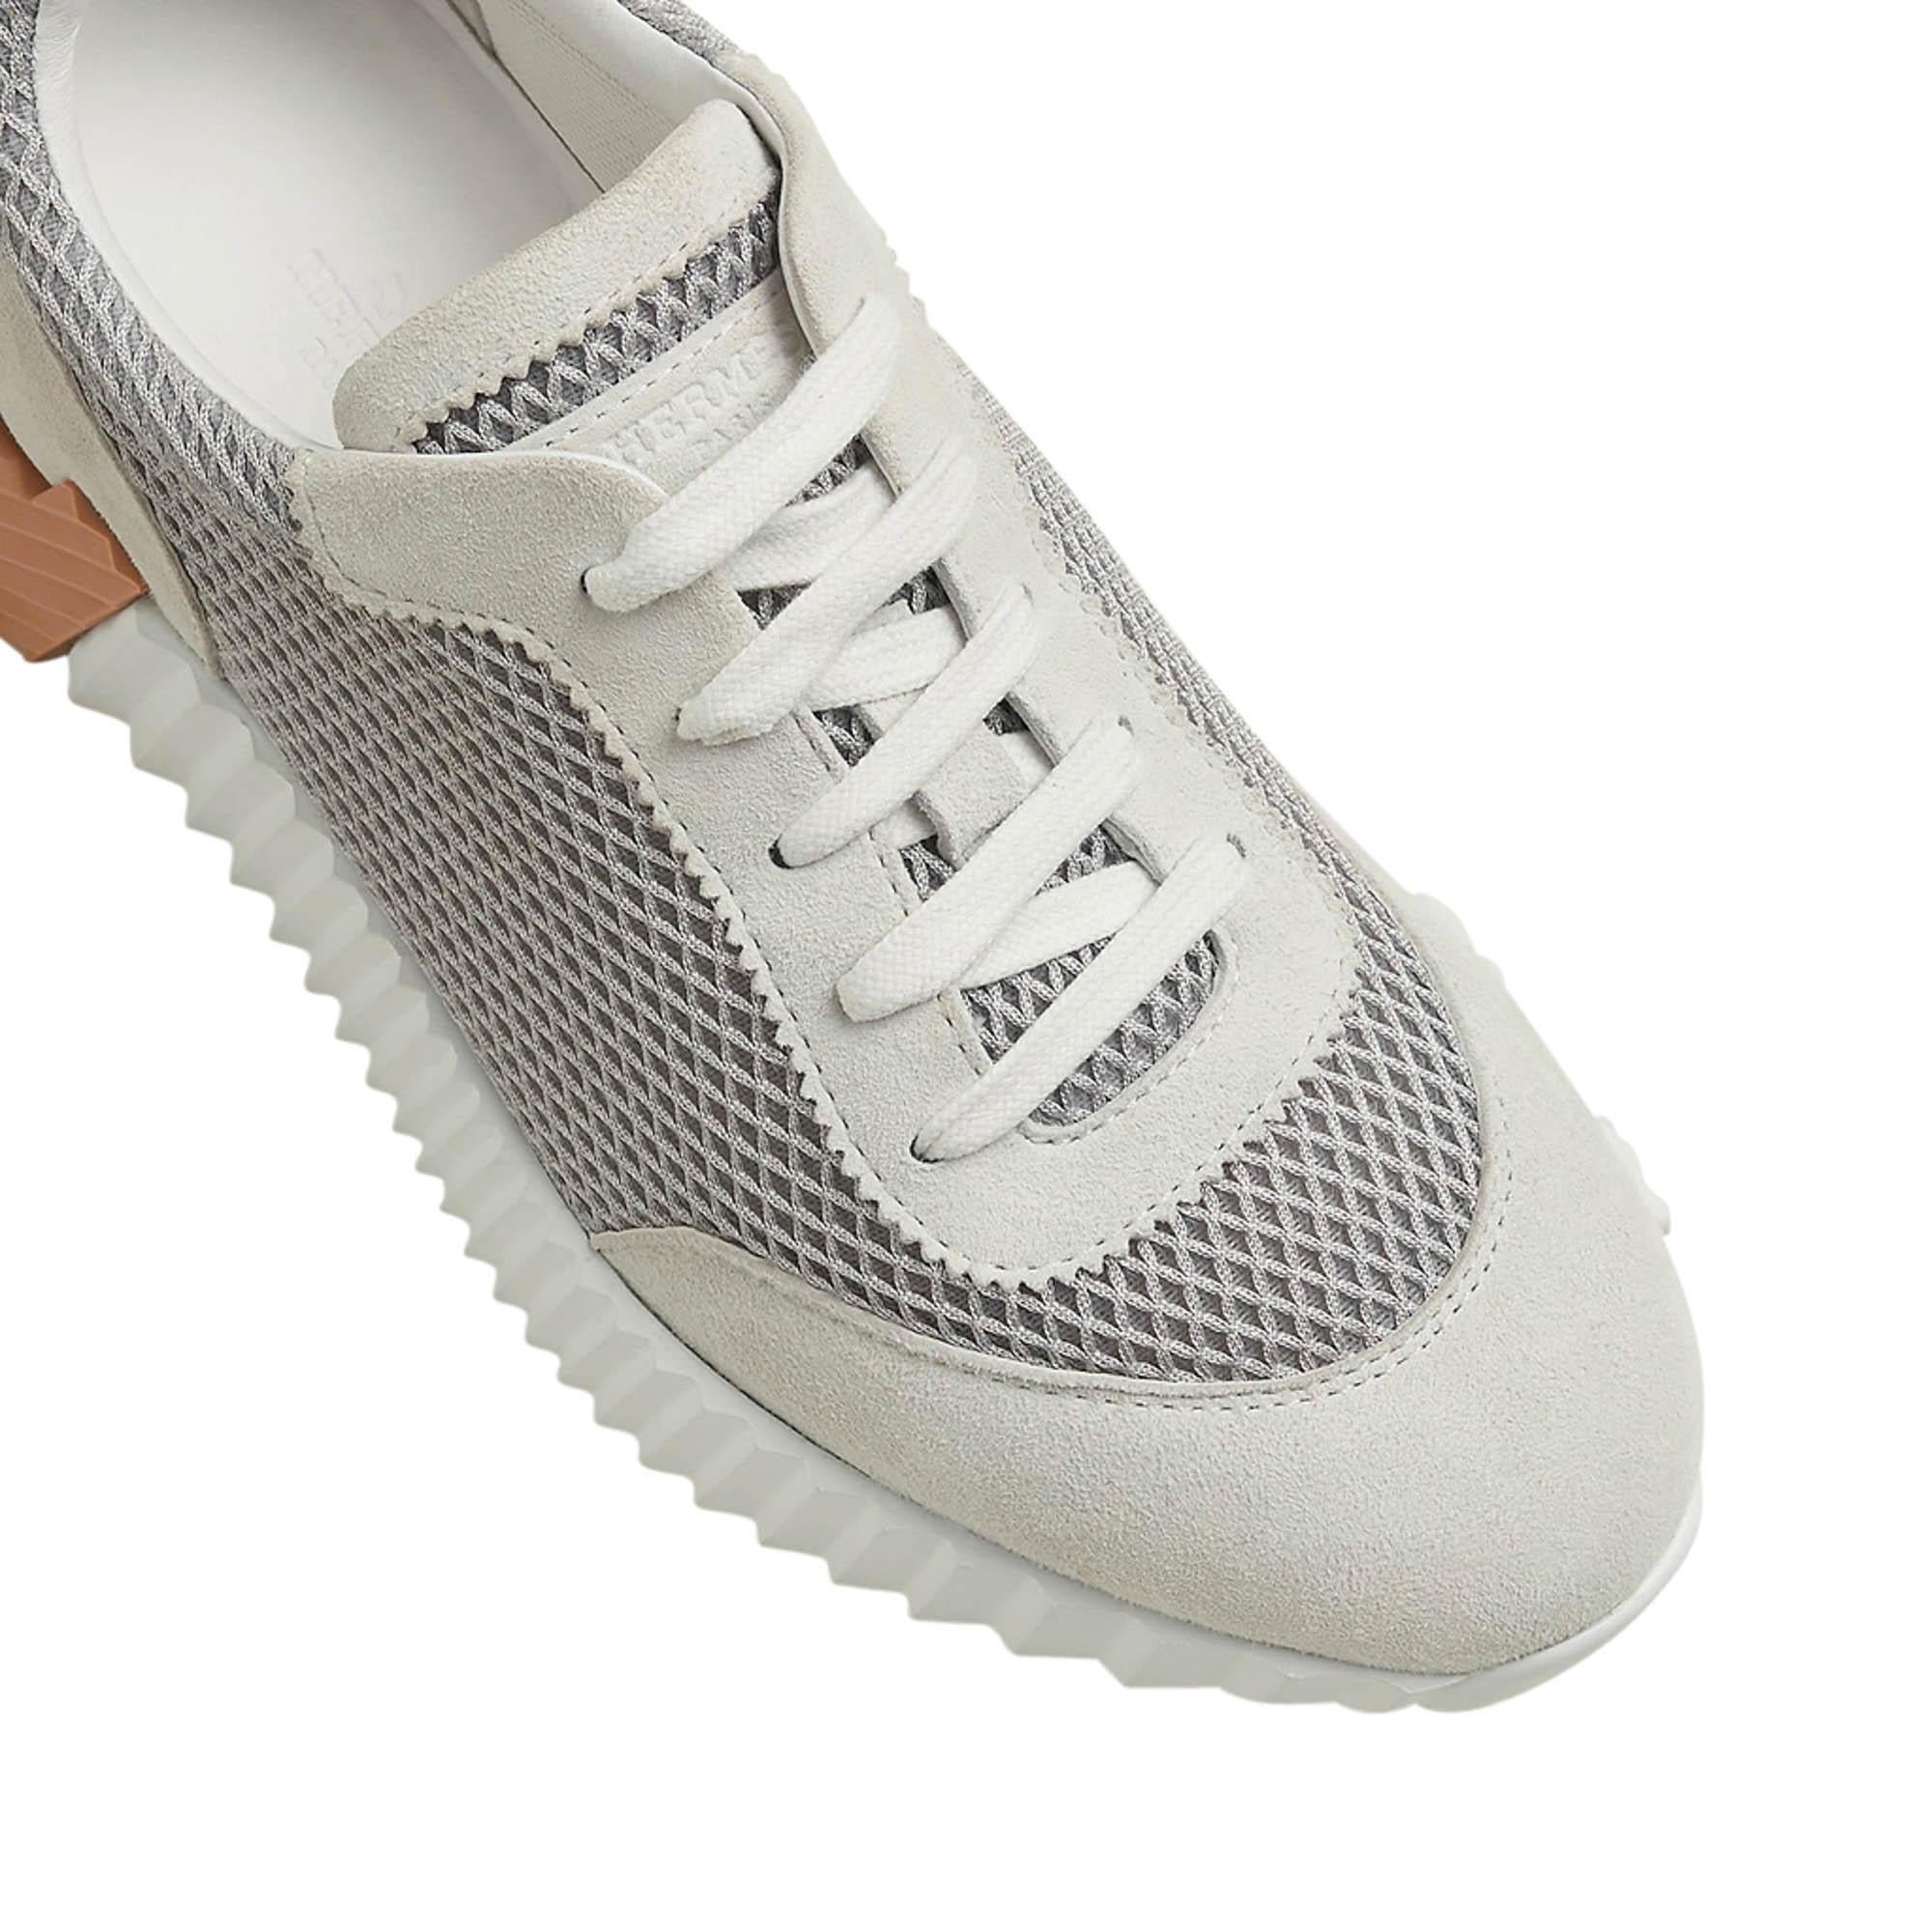 Hermes Bouncing Sneaker Gris Lulea and Blanc 37 / 7 For Sale 4